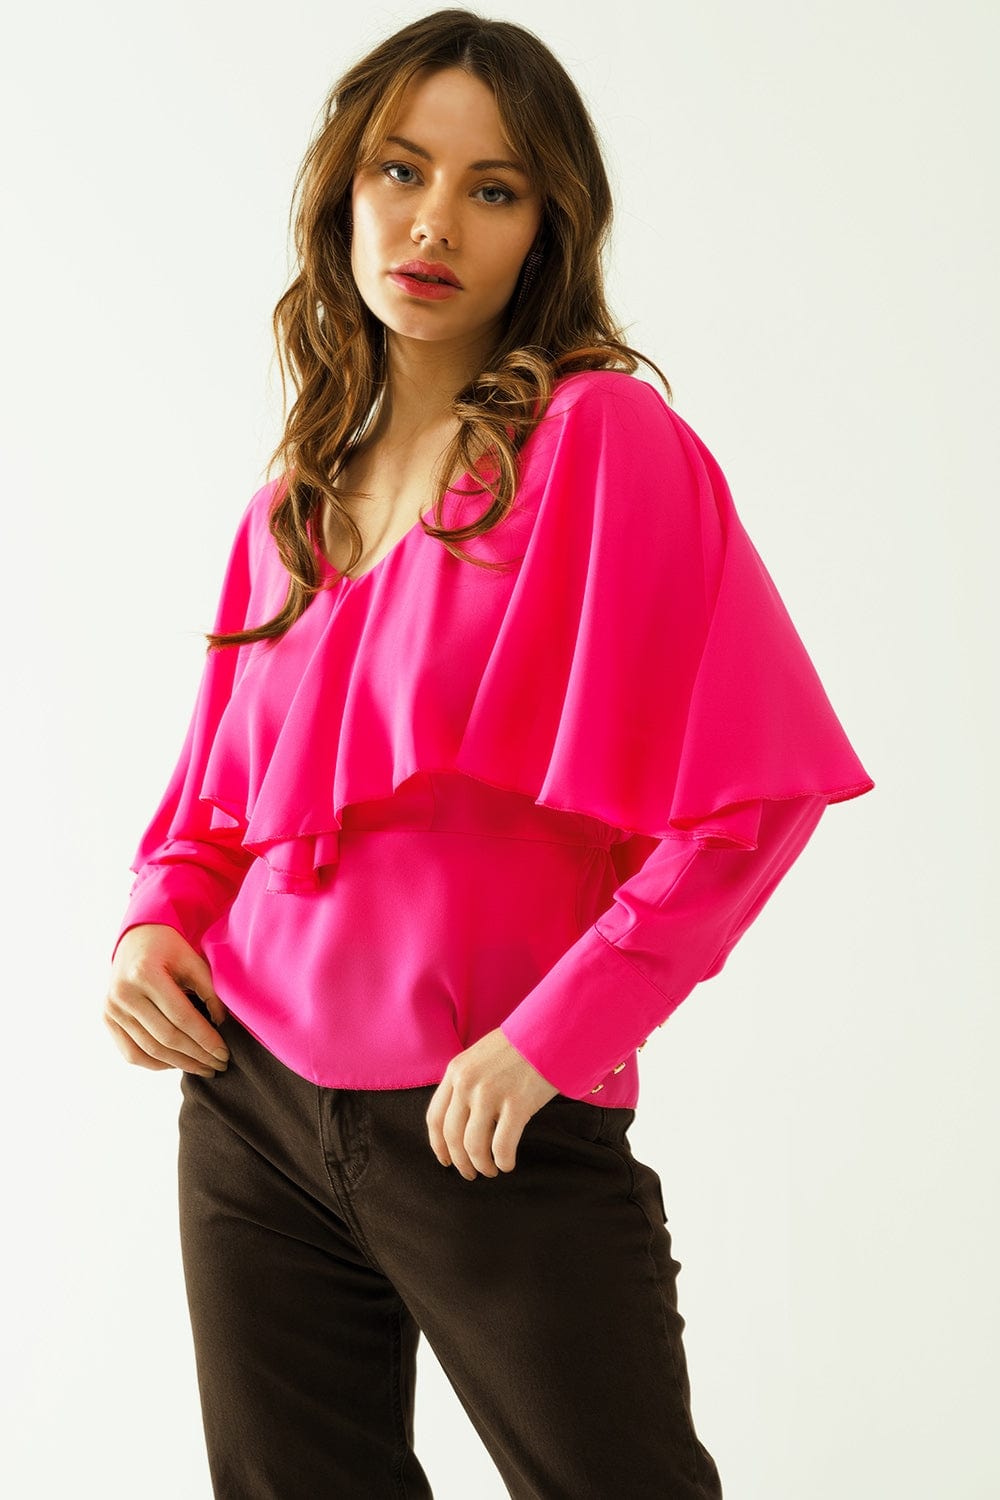 Q2 Women's Blouse Ruffled V-Neck Top With Buttoned Cuffs And Tie In The Back Detal In Fuchsia